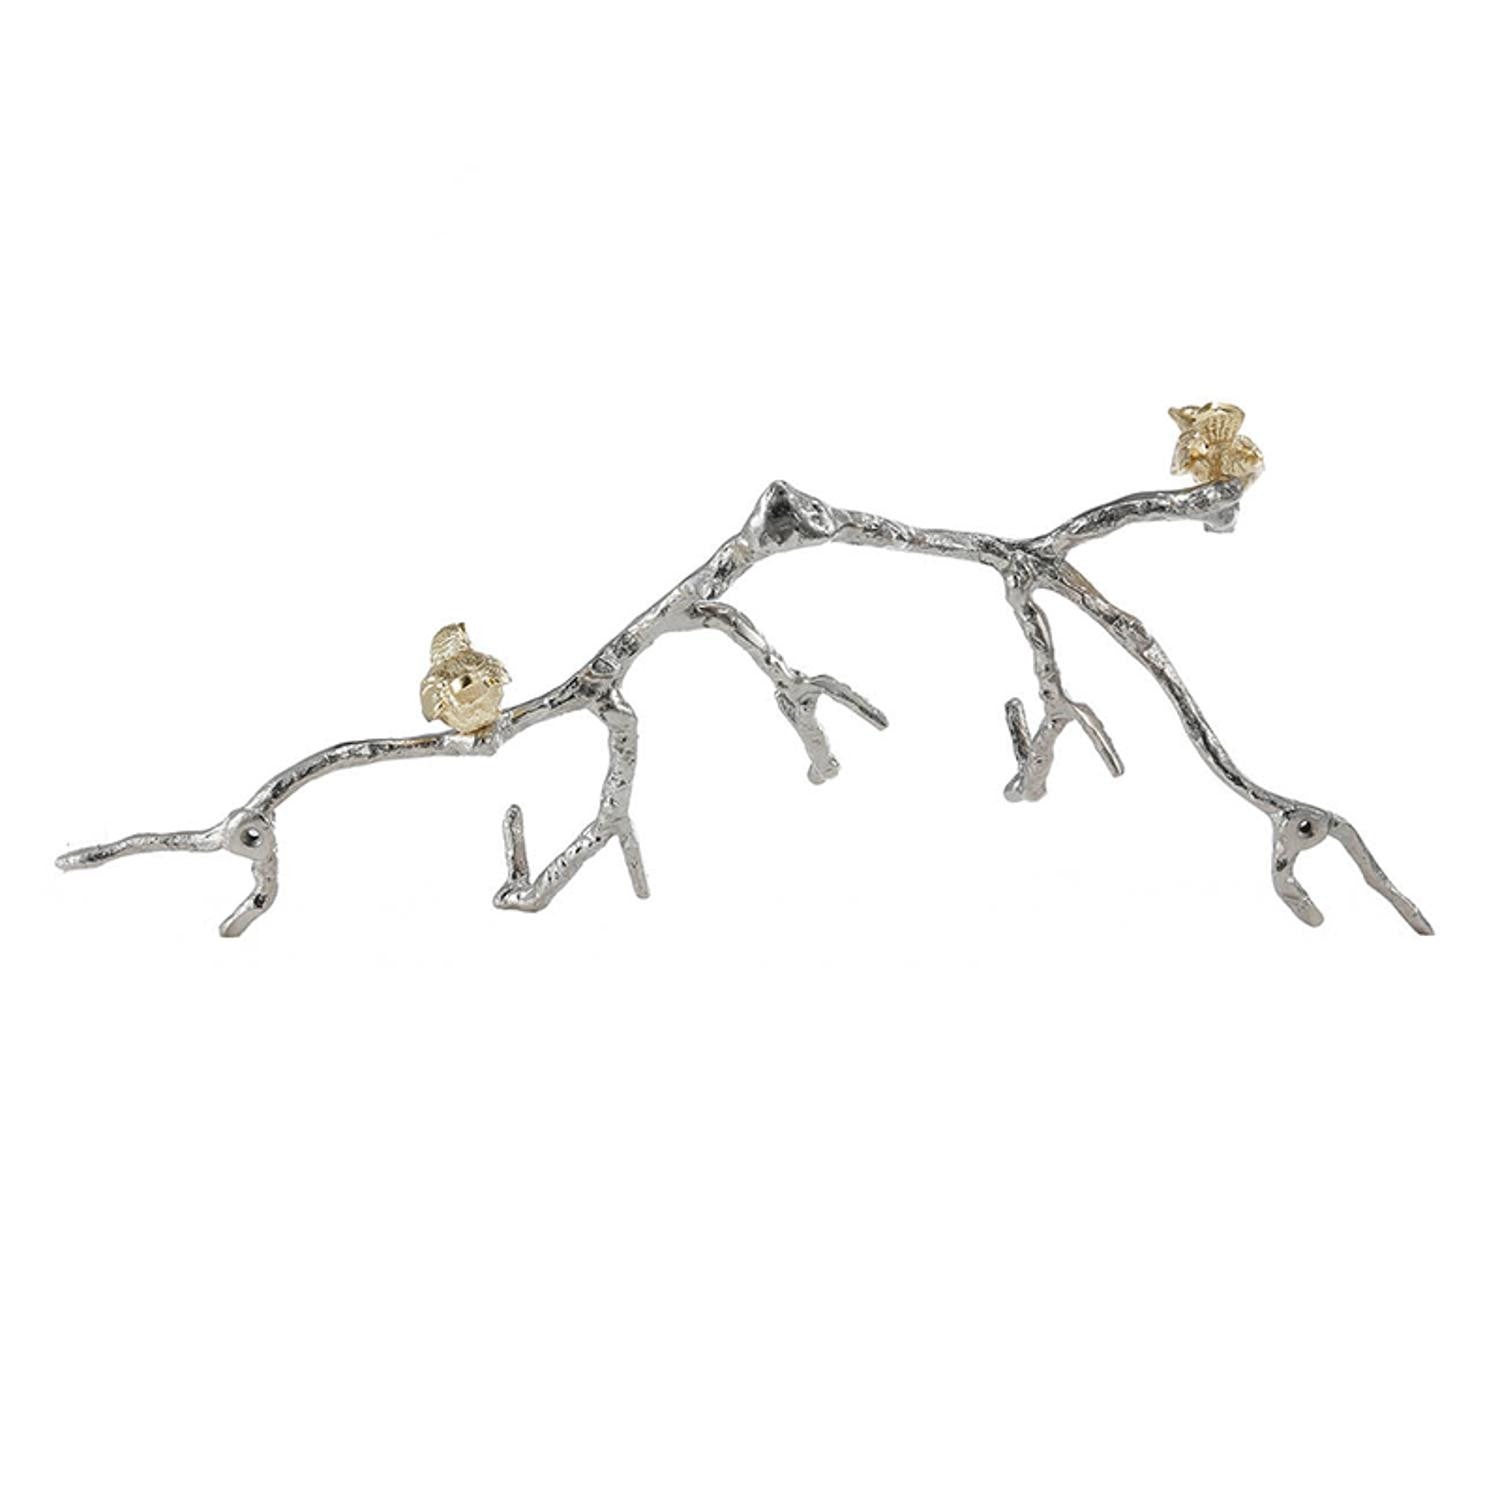 Silver and Gold Bird and Branch Wall Decor